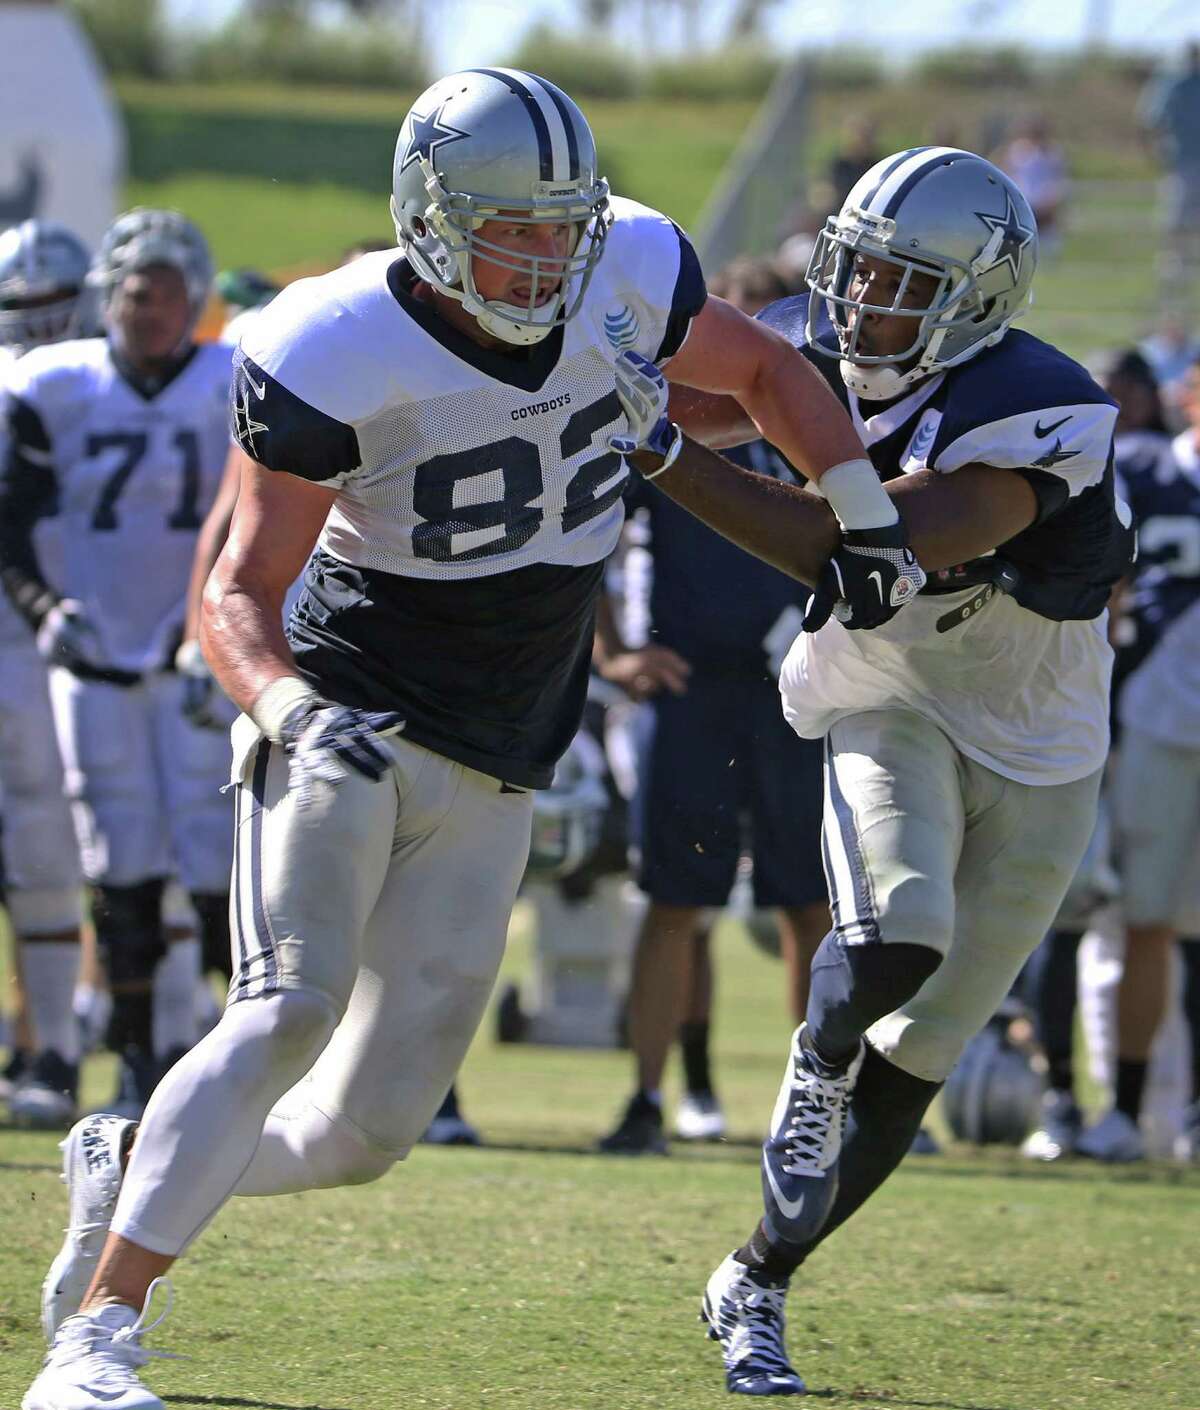 Dallas Cowboys tight end Jason Witten (82) cuts around strong safety Barry Church (42) during afternoon practic e at training camp in Oxnard, Calif., on Saturday, Aug. 1, 2015.